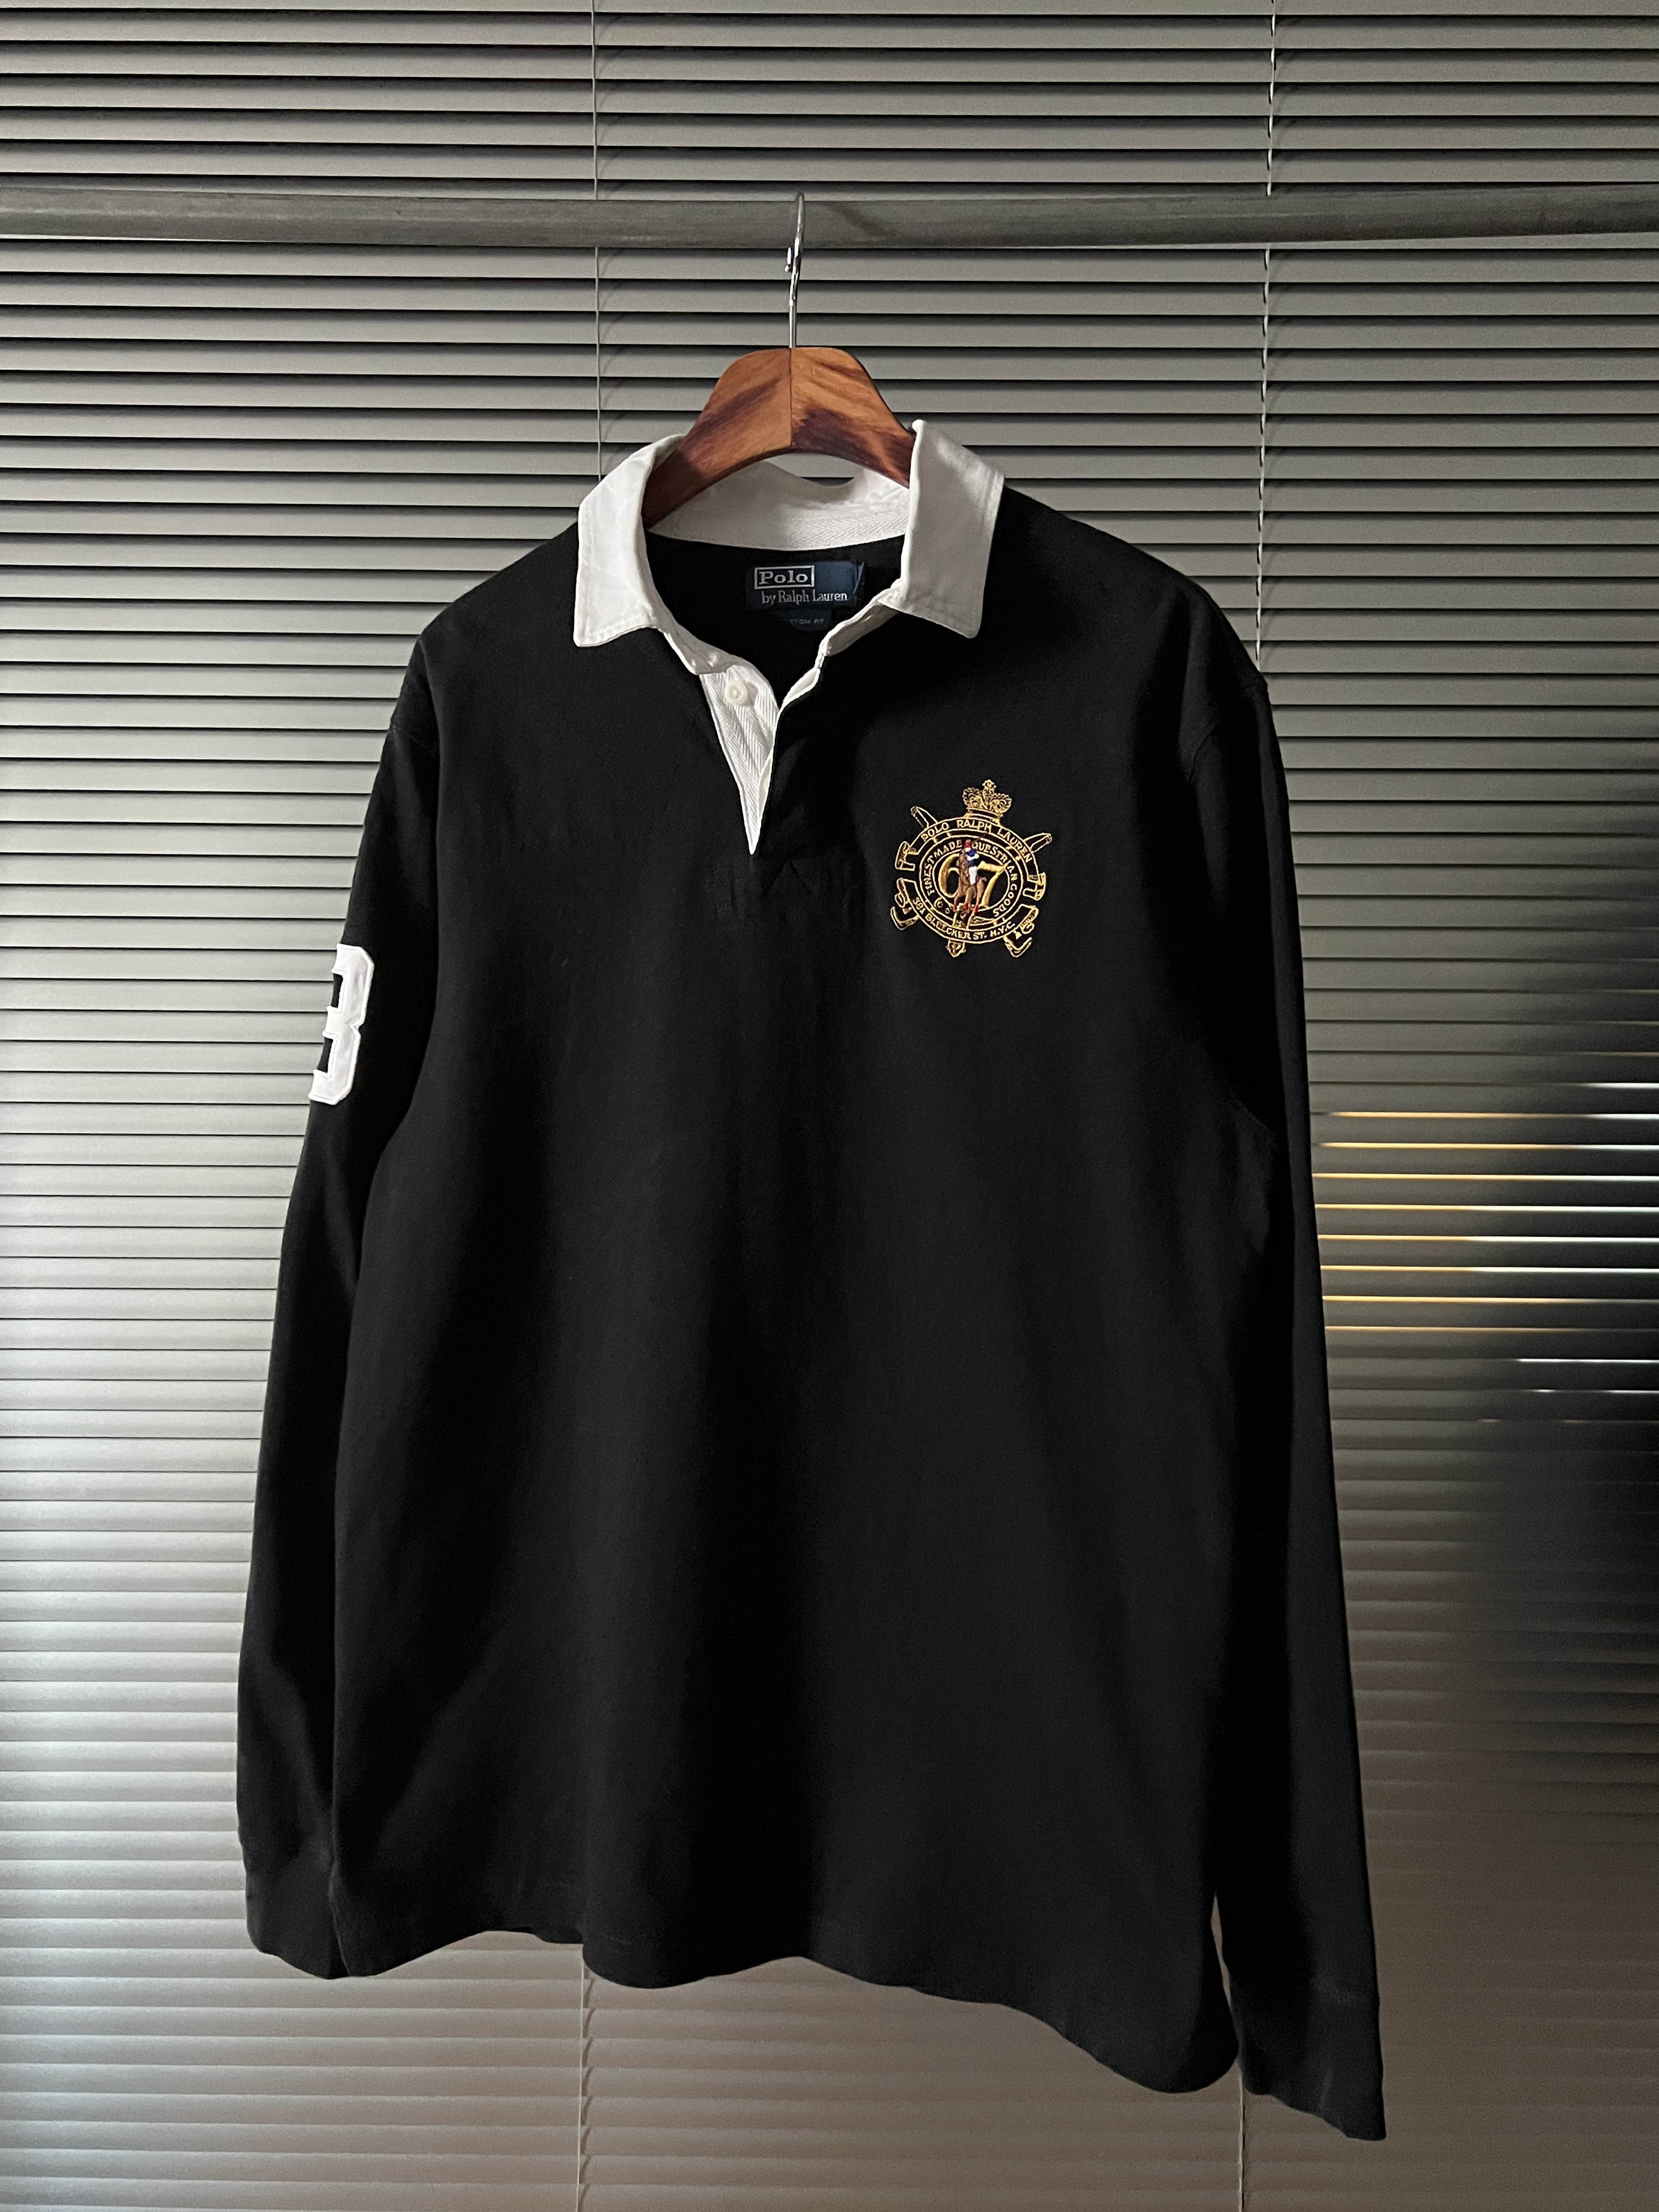 Polo Ralph Lauren rugby shirts